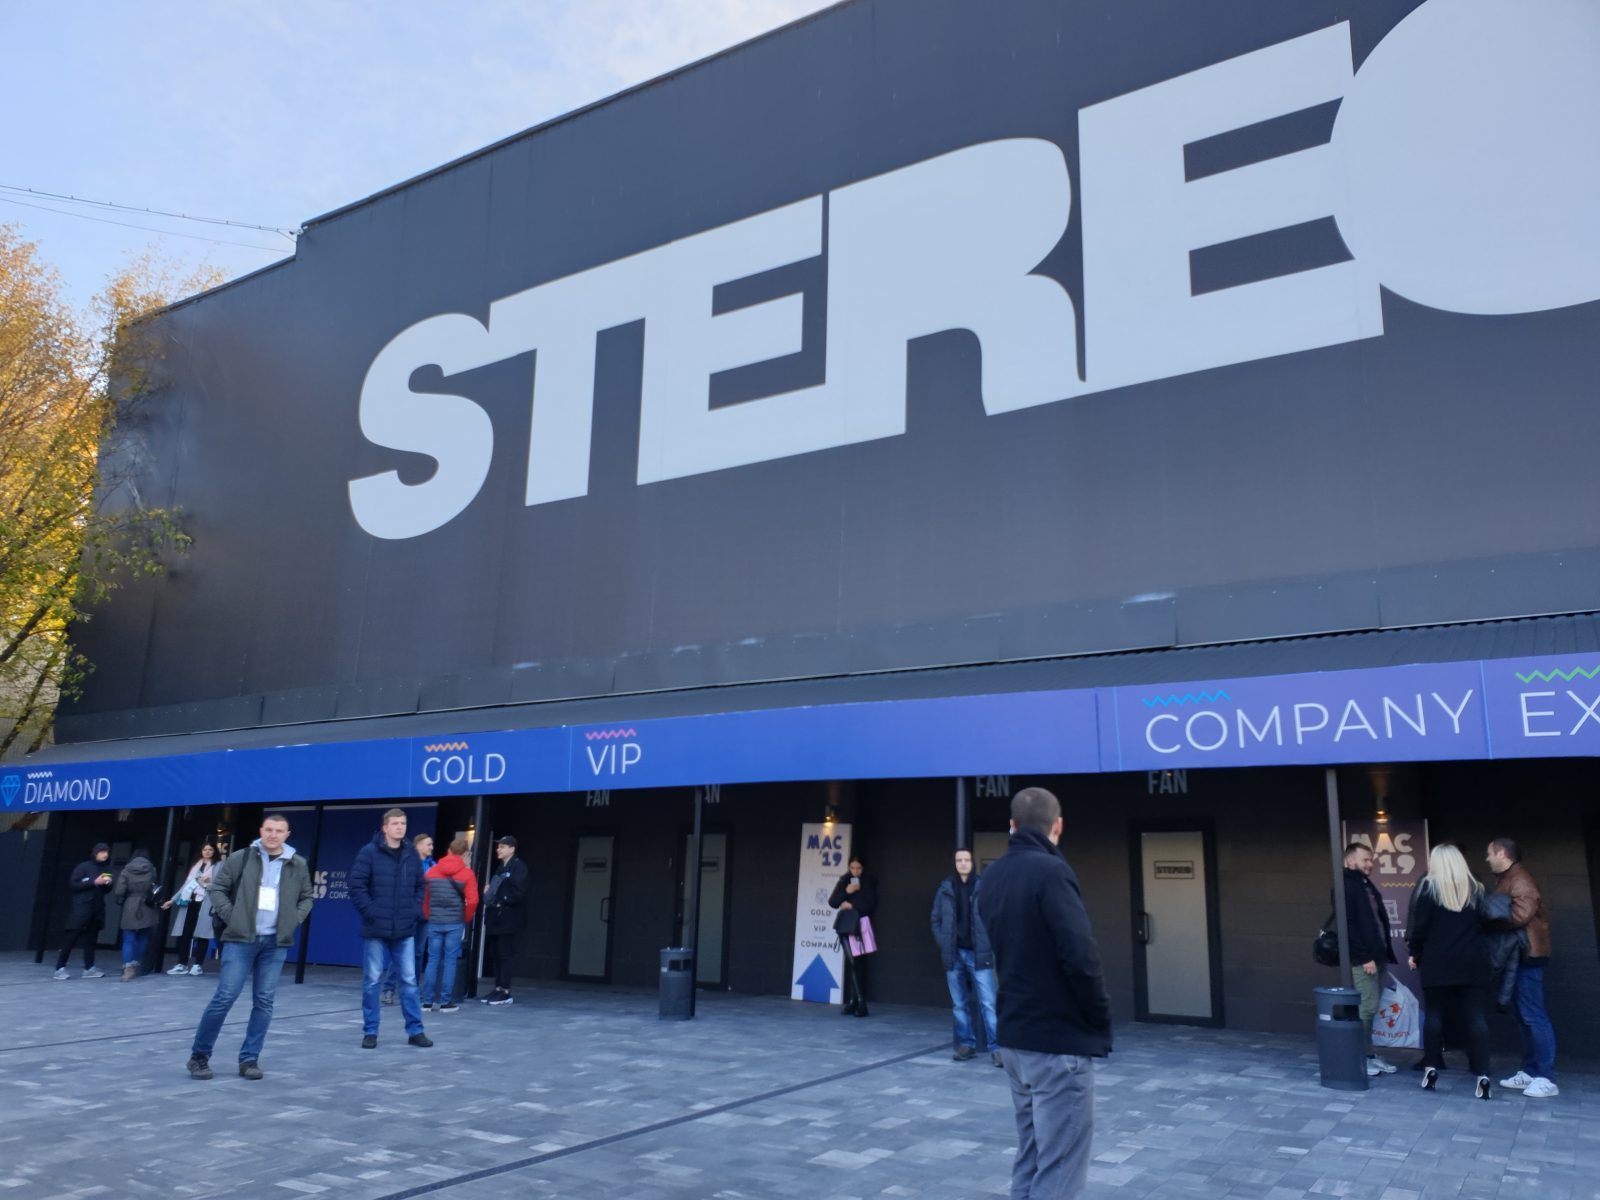 Stereo Plaza Kyiv Affiliate Conference 2019